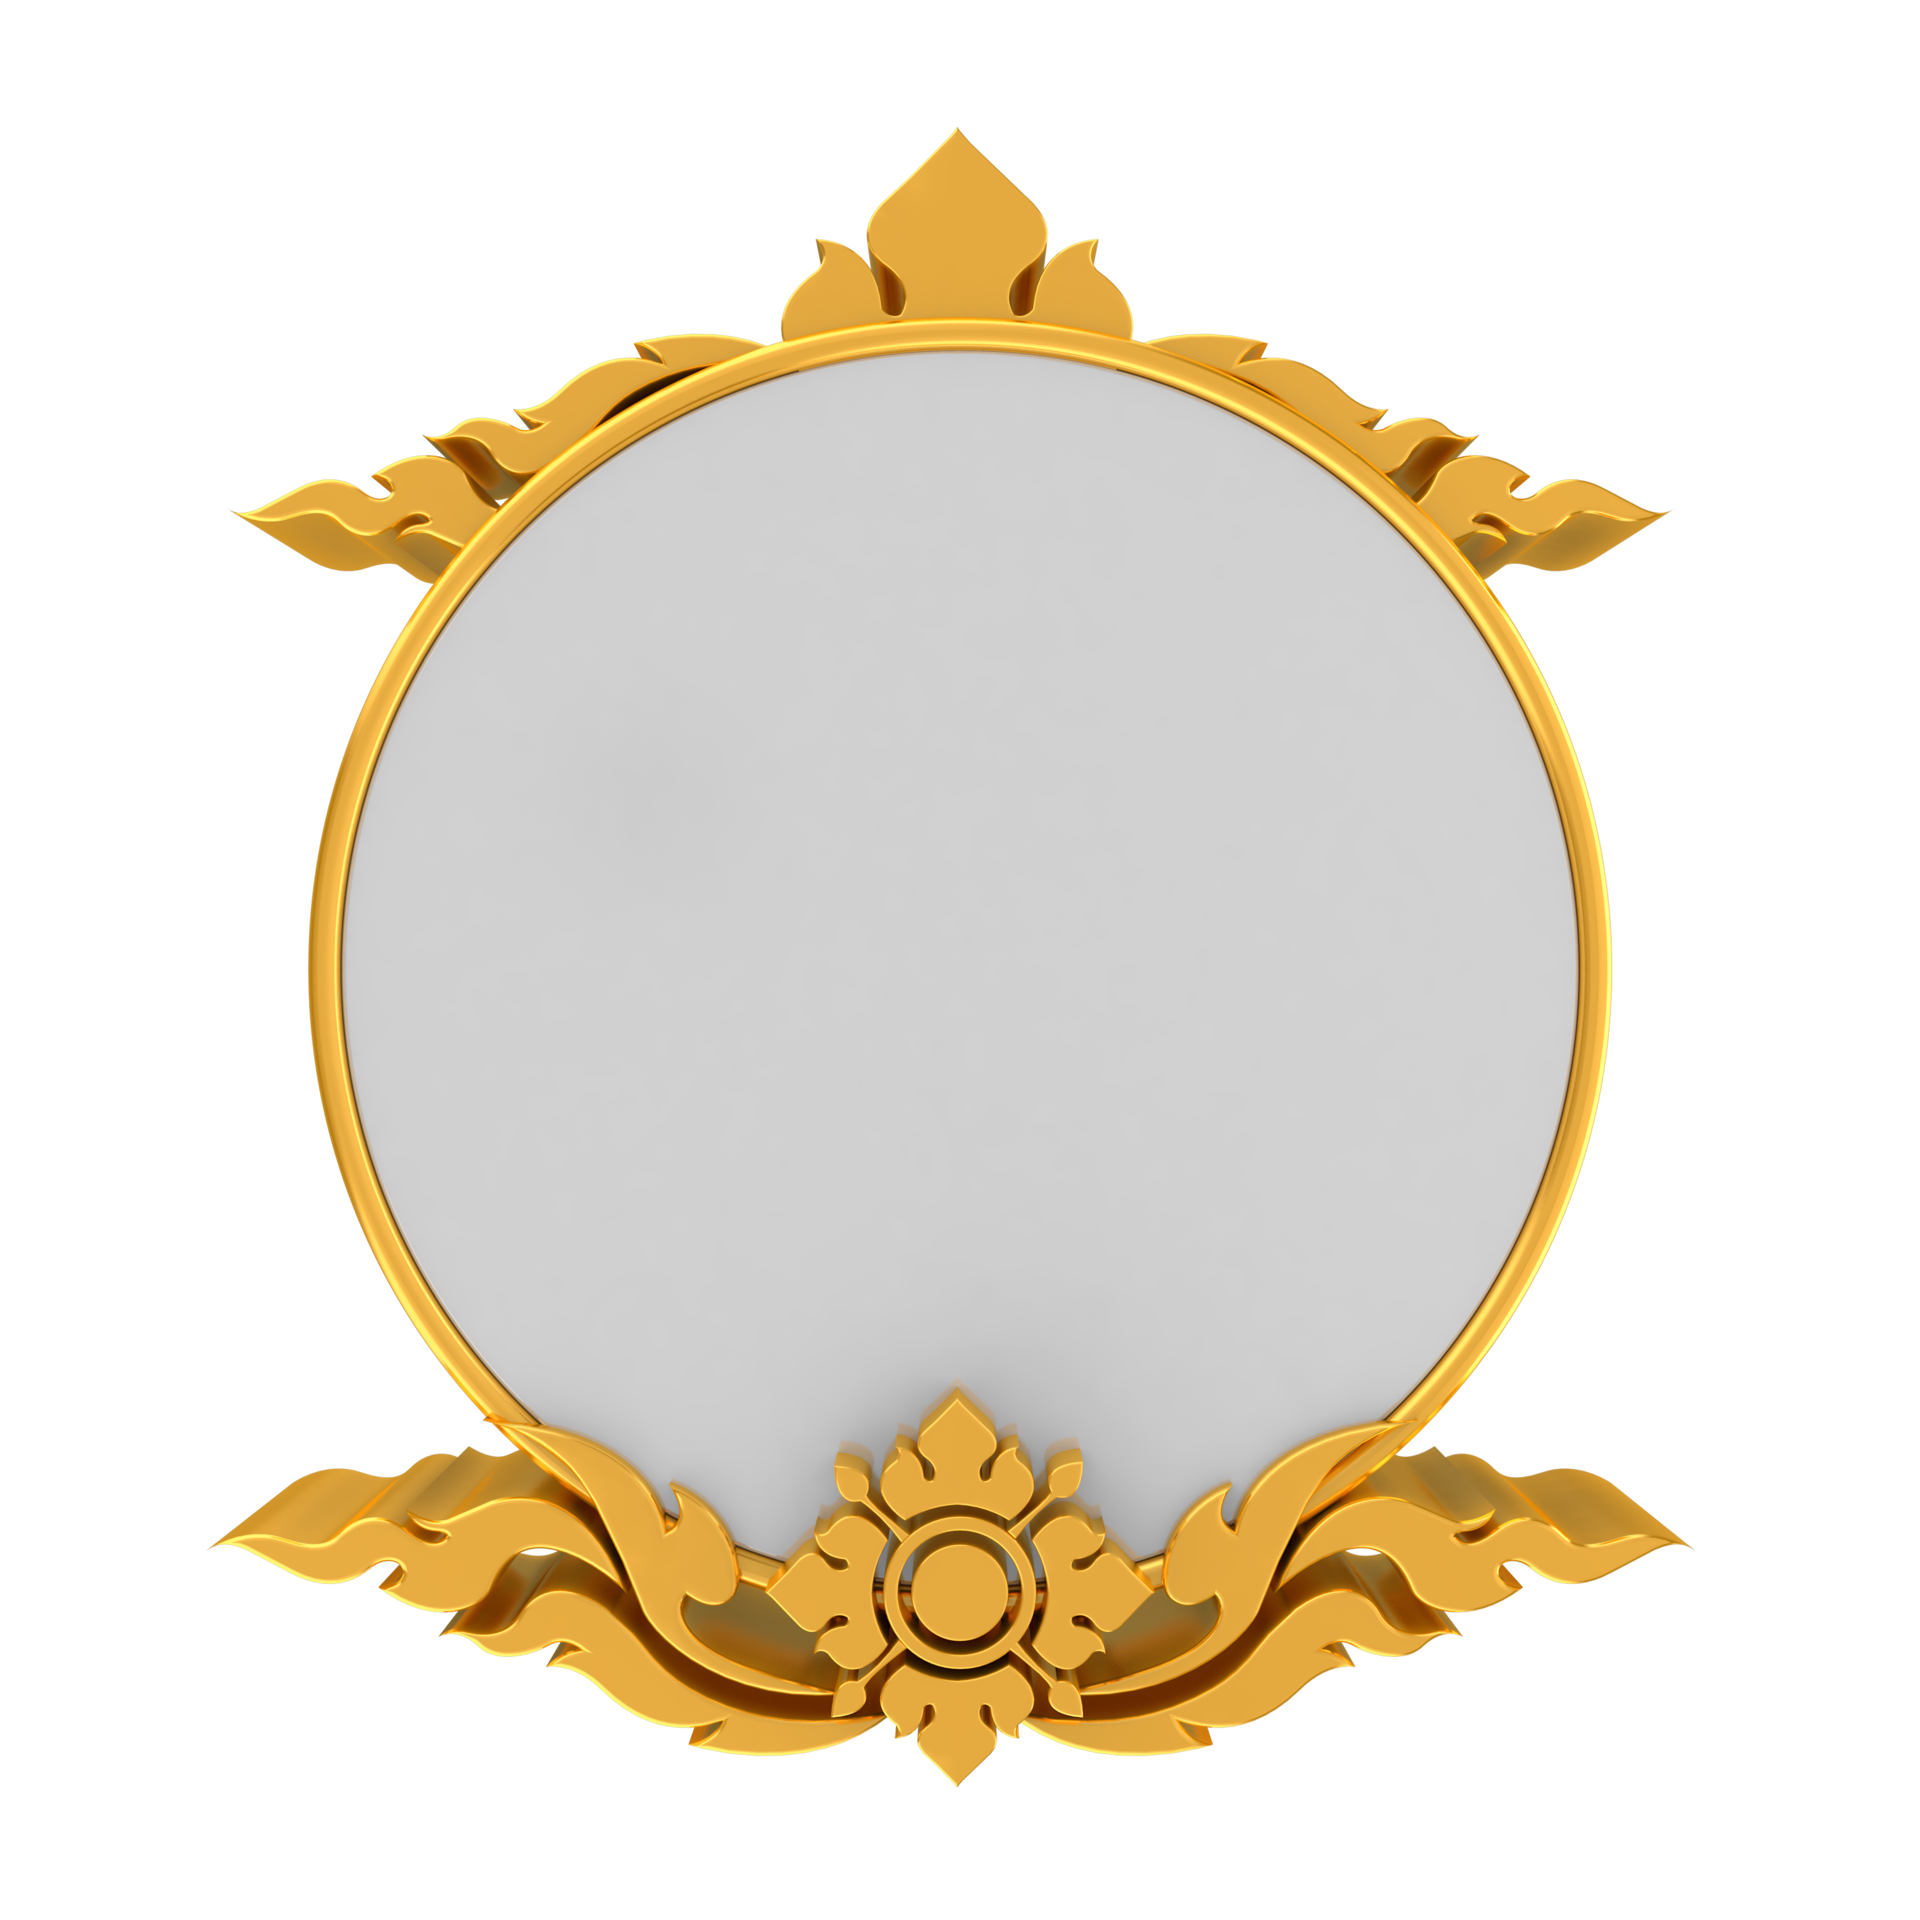 khmer golden round frame with a floral design on it 27256185 PNG